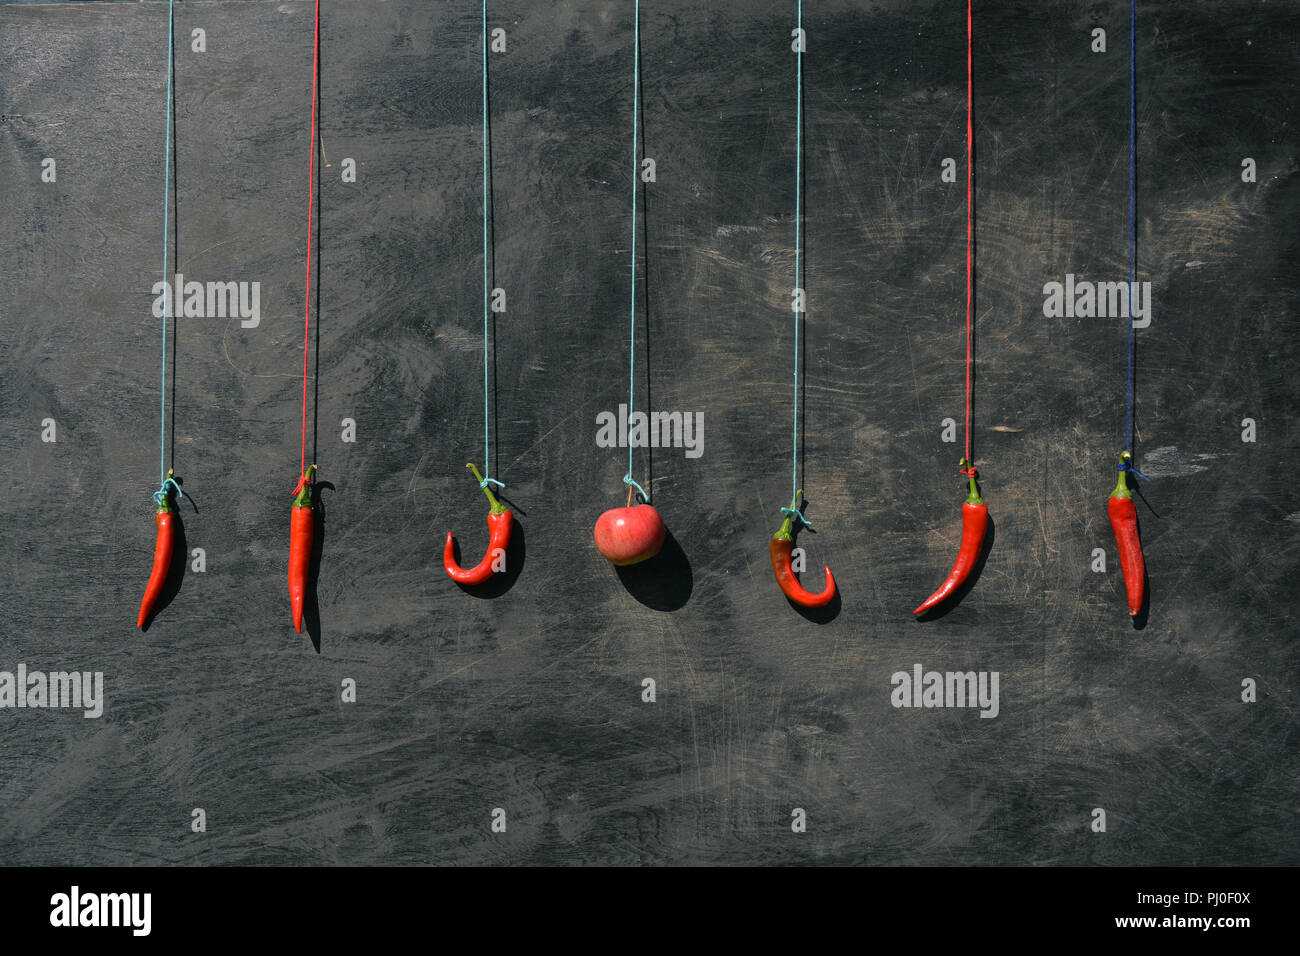 Hanging on colorful strings group red hot chili peppers and apple on old wooden background Stock Photo